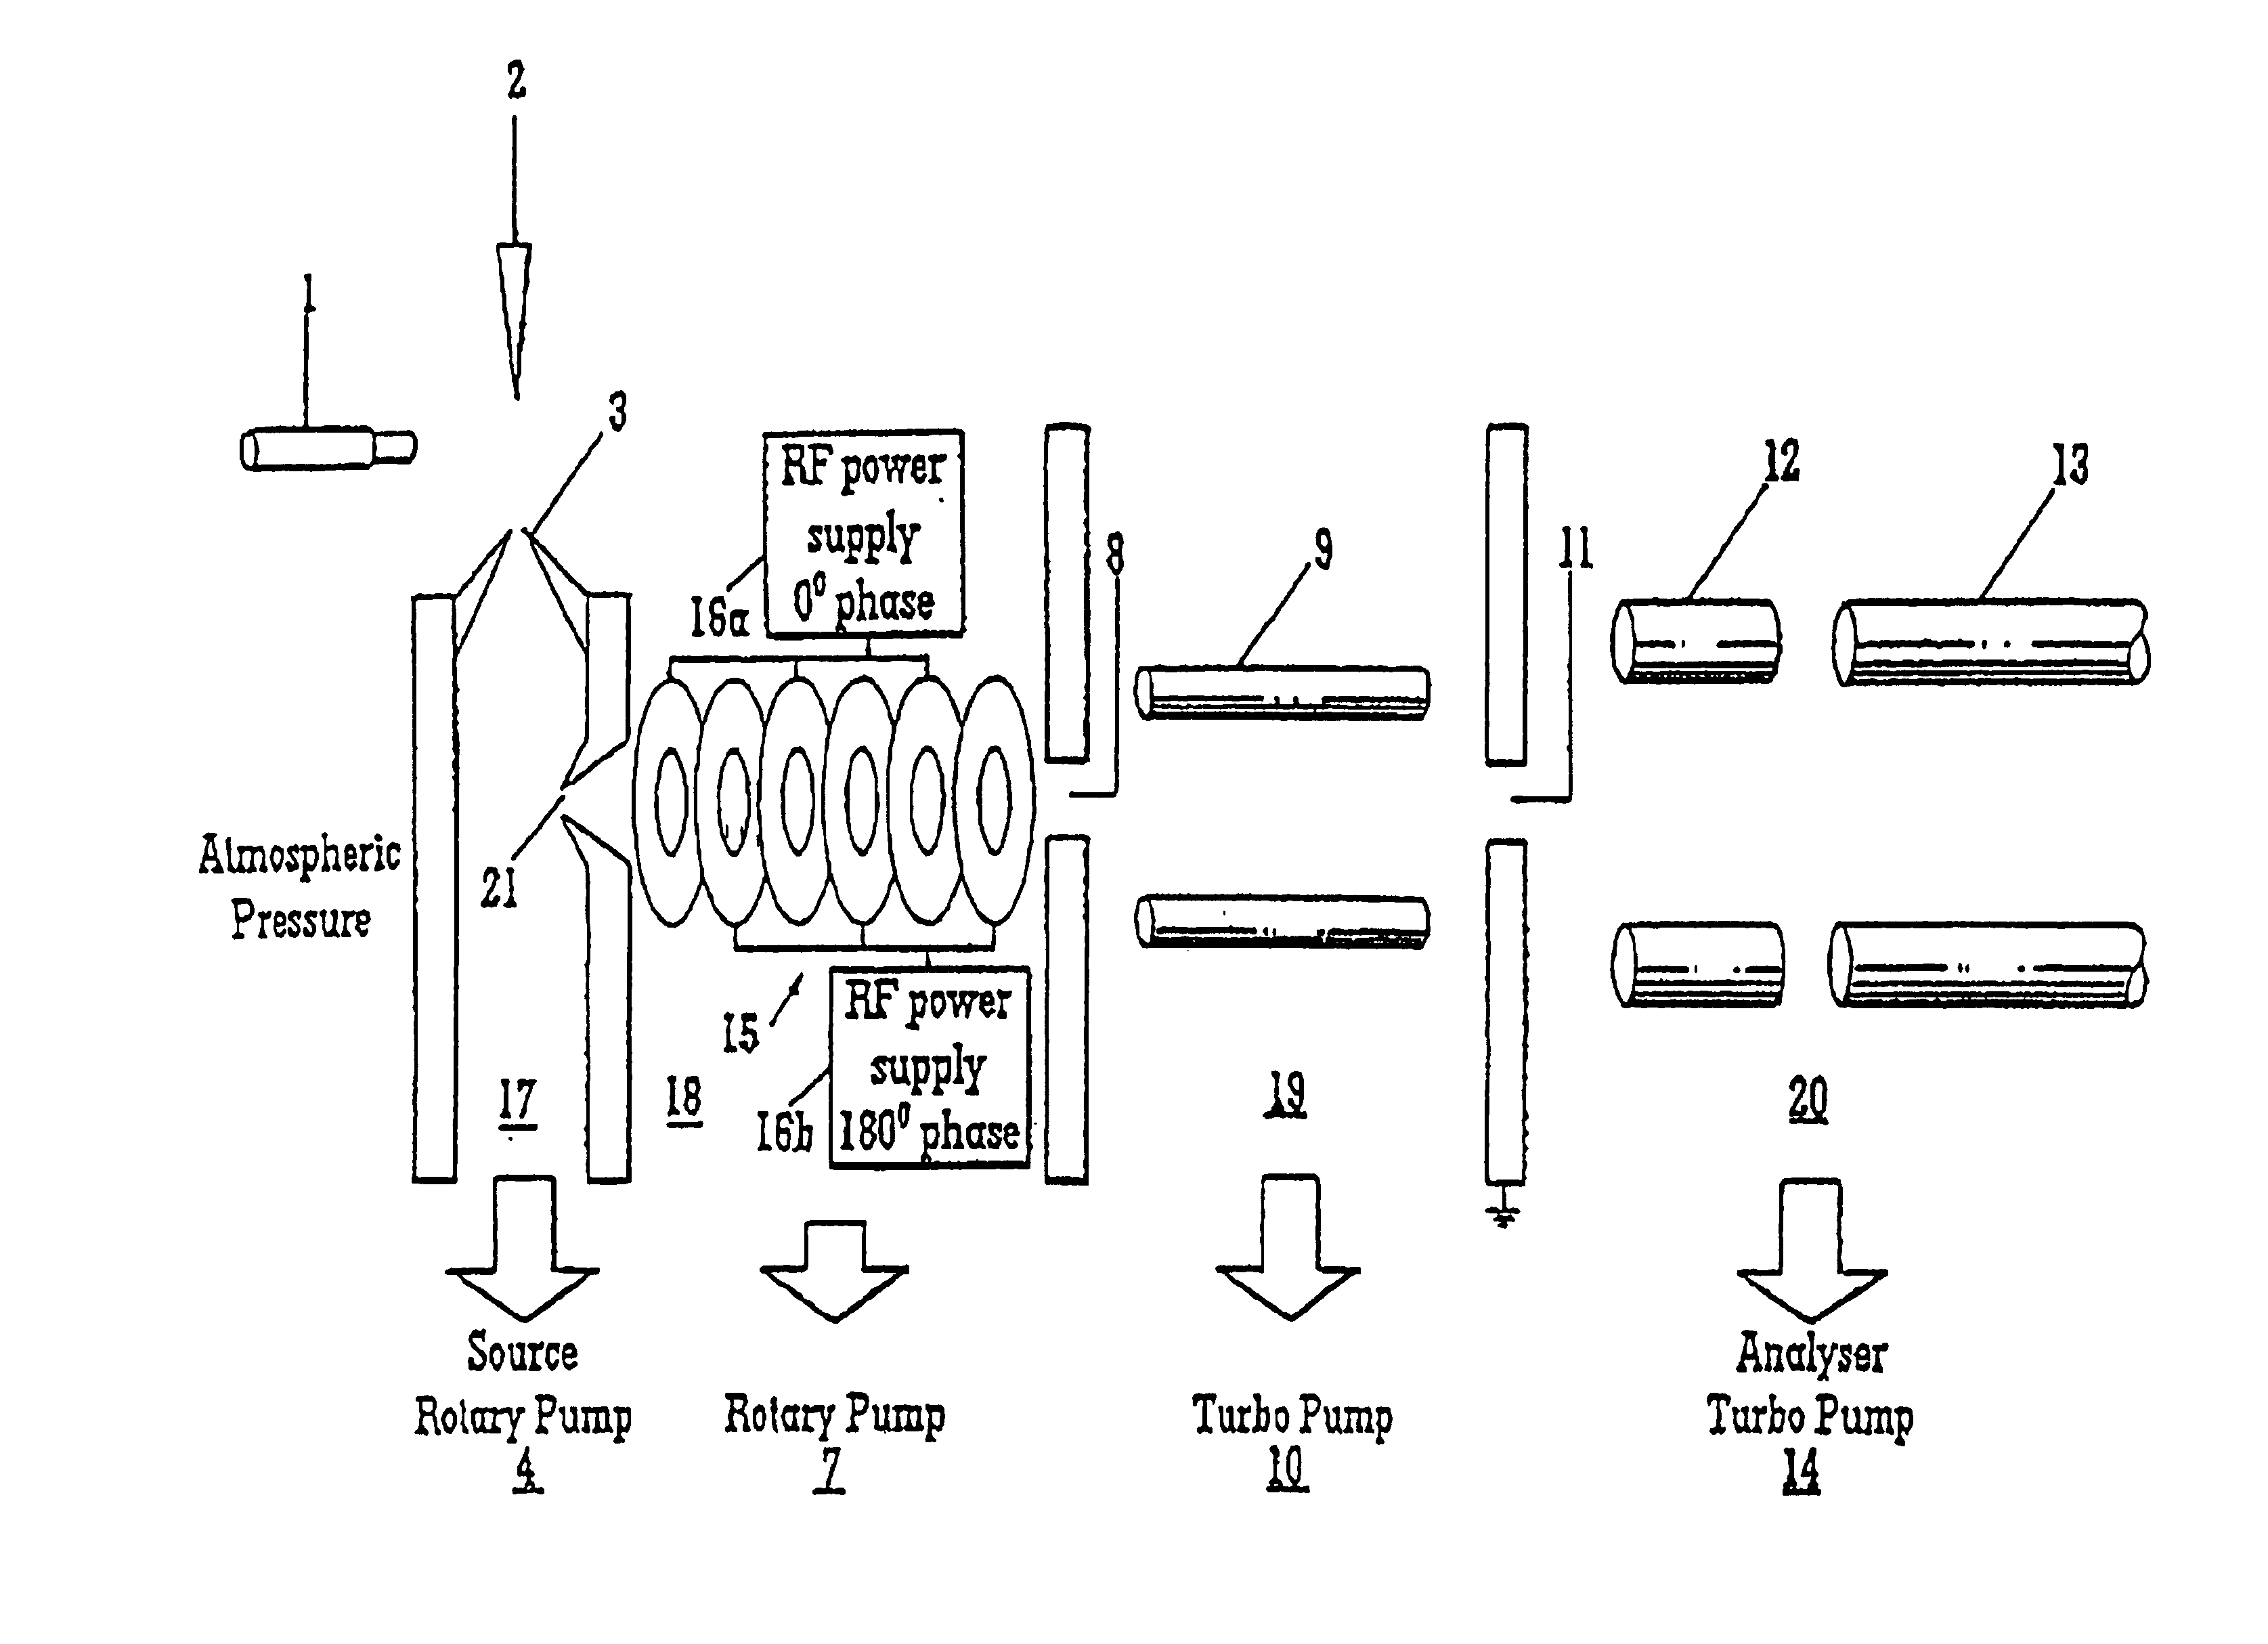 Mass spectrometers and methods of mass spectrometry